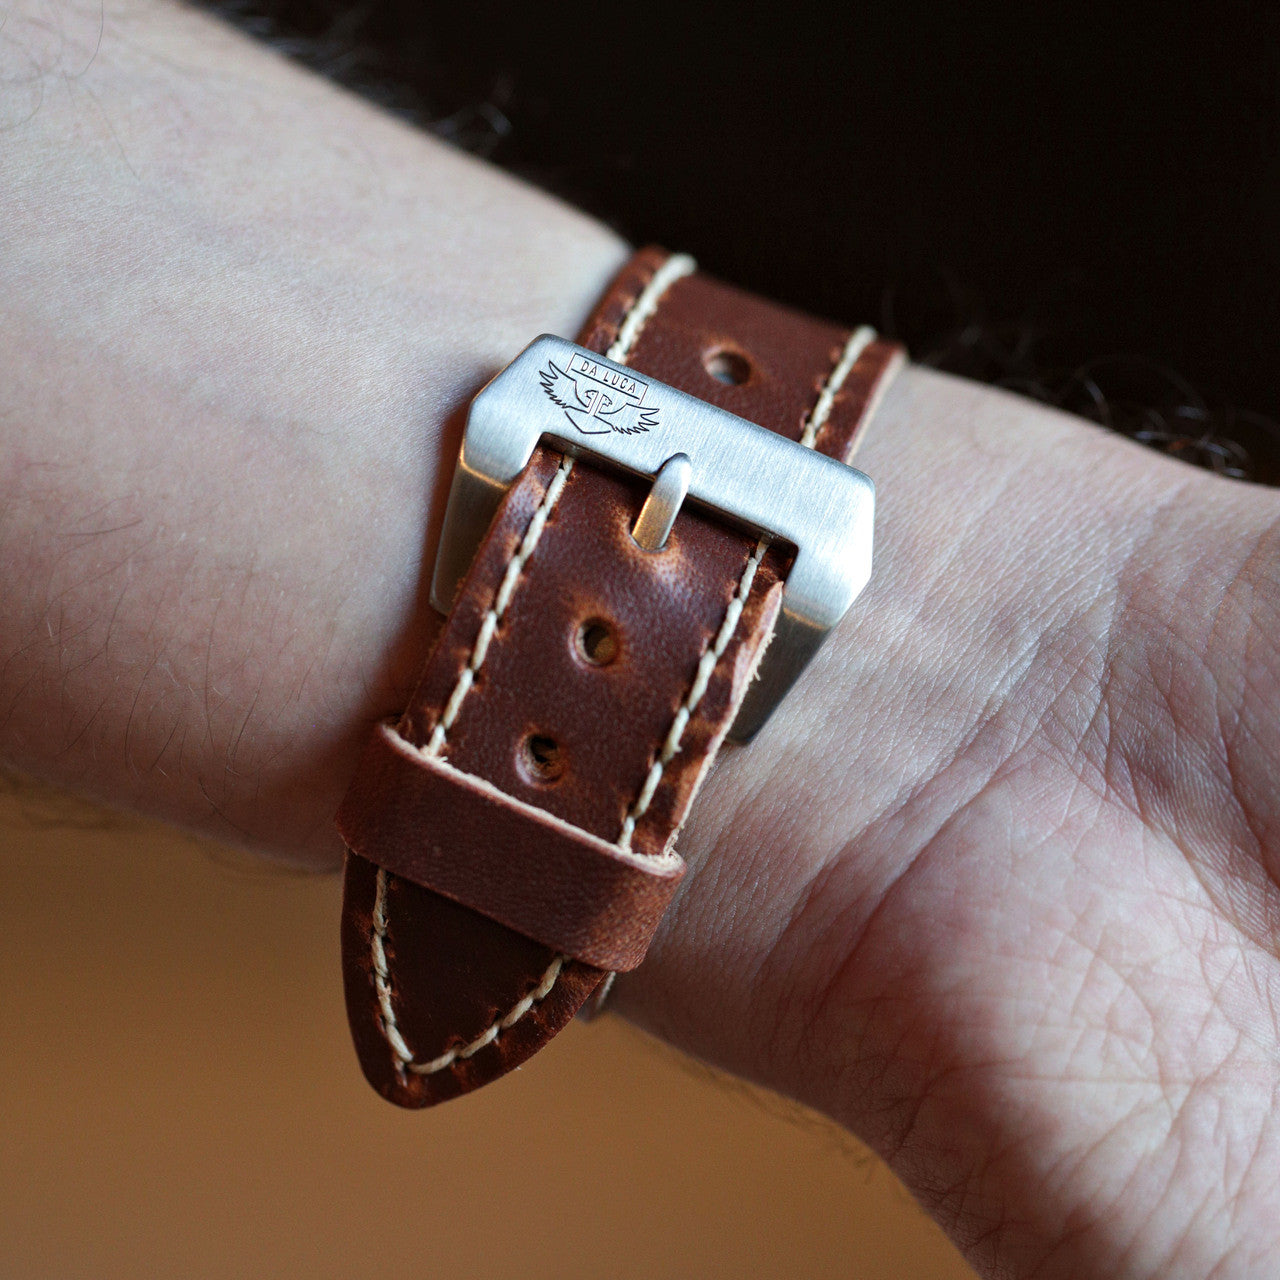 Watch Strap Horween Natural Dublin PAM233 Close Up By DaLuca Straps.